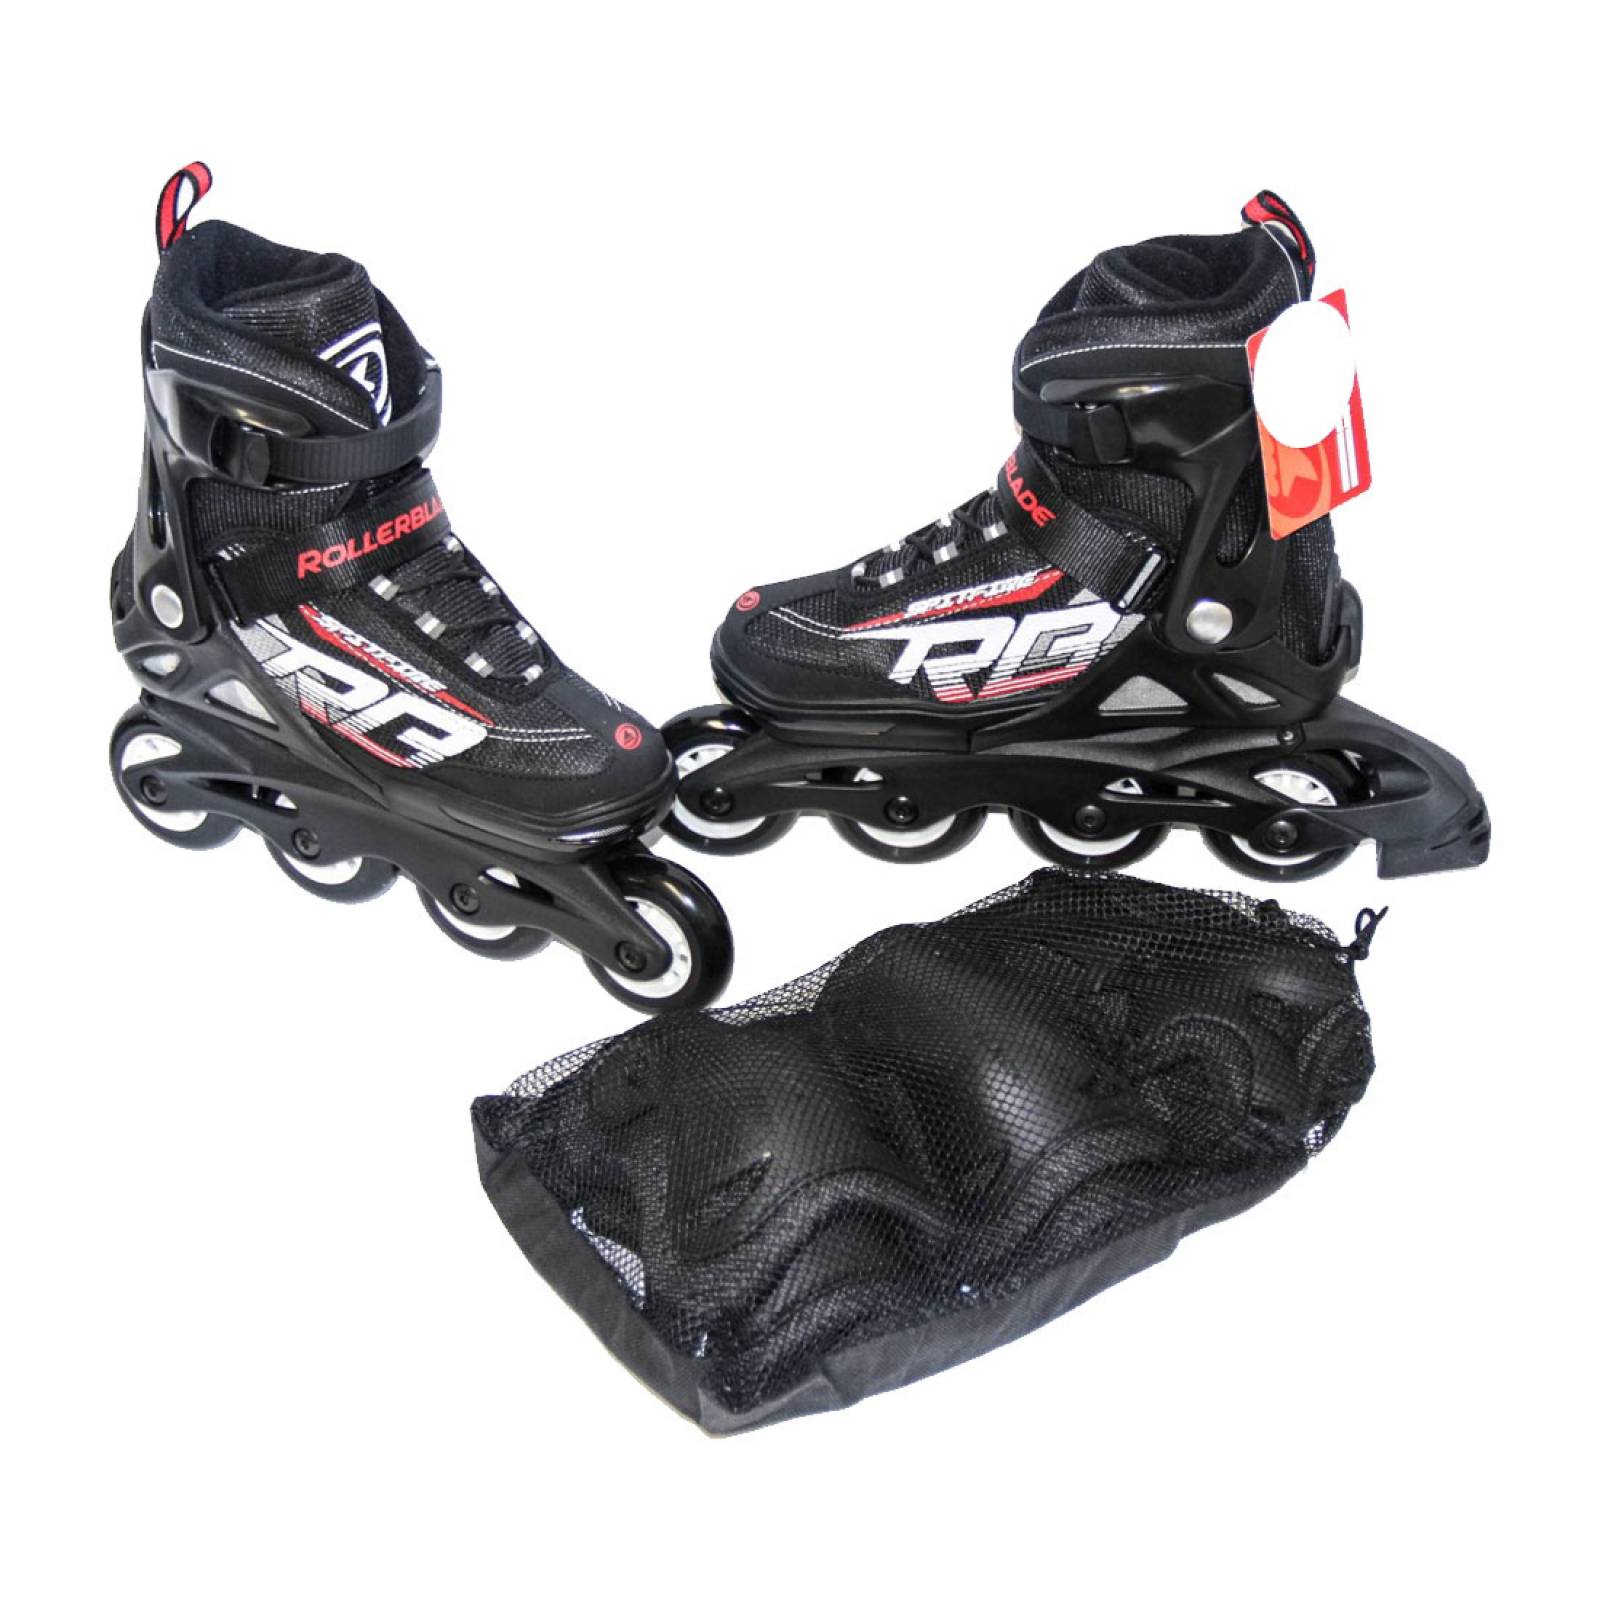 Patines Spitfire Ajustables Combo 23-26 Rojo Rollerblade